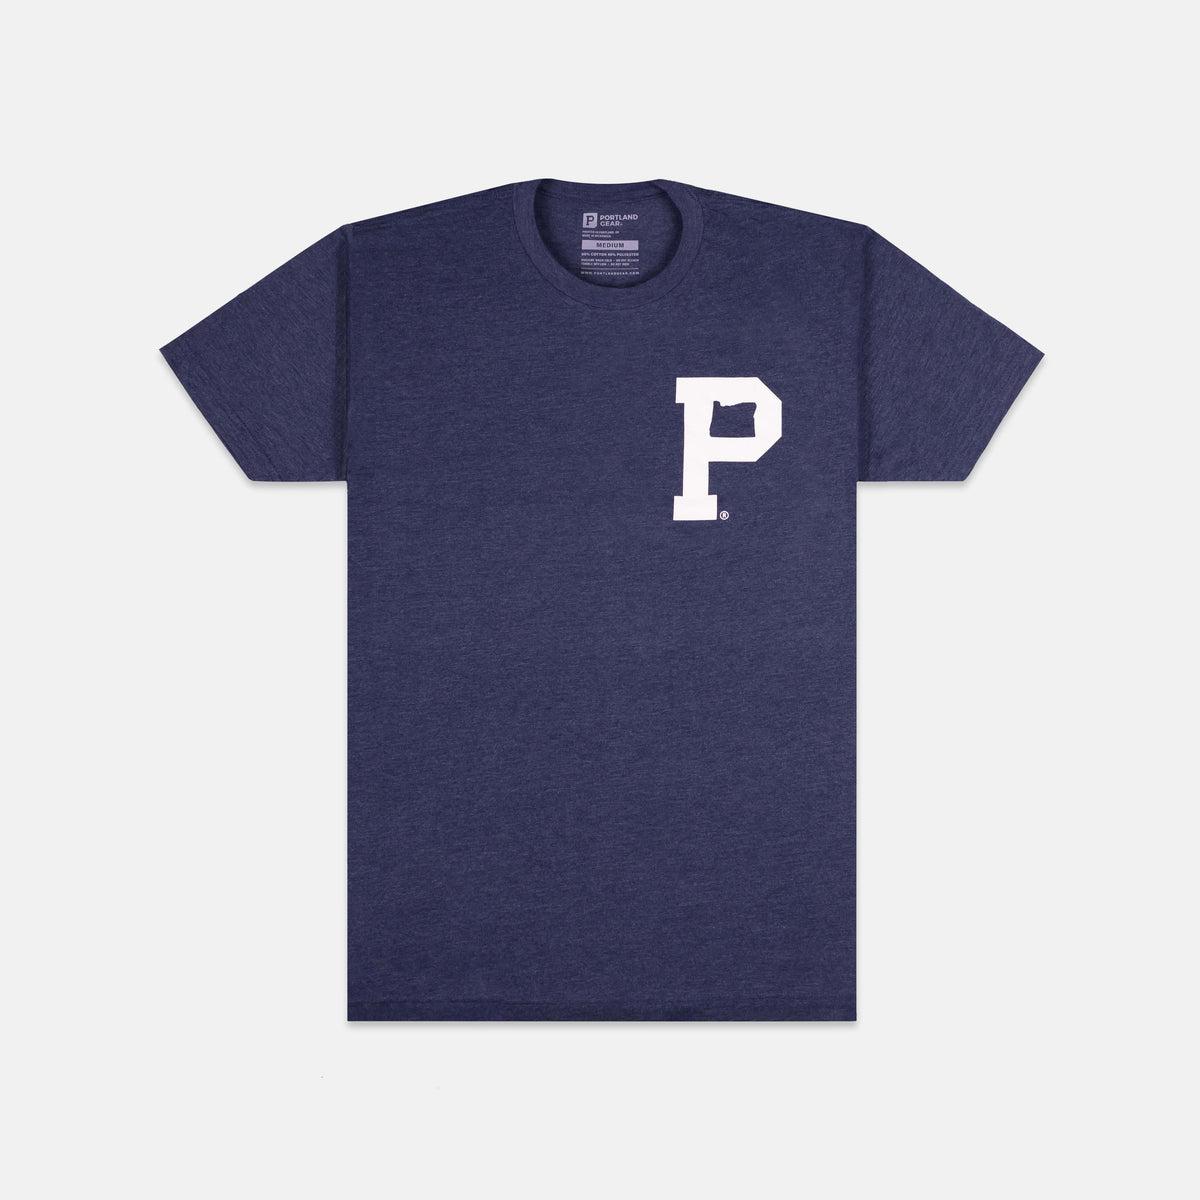 CROPPED T-SHIRT WITH SLOGAN - White / Navy